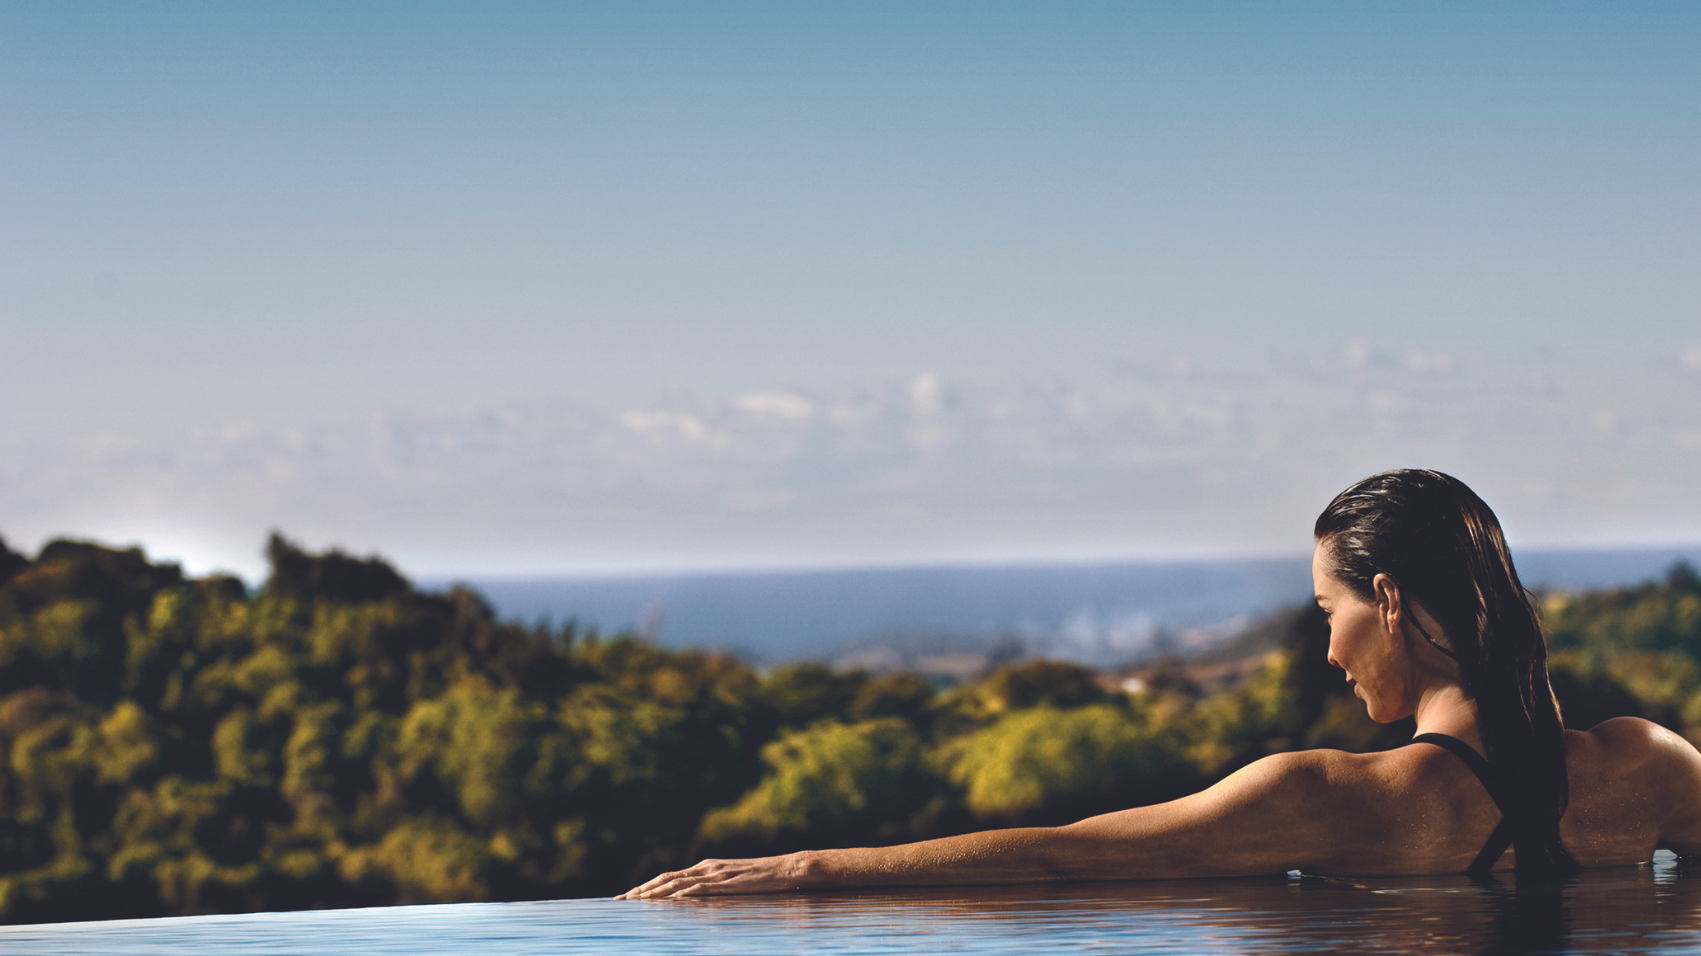 Prepare to relax - 5 Tips to make the most out of your retreat